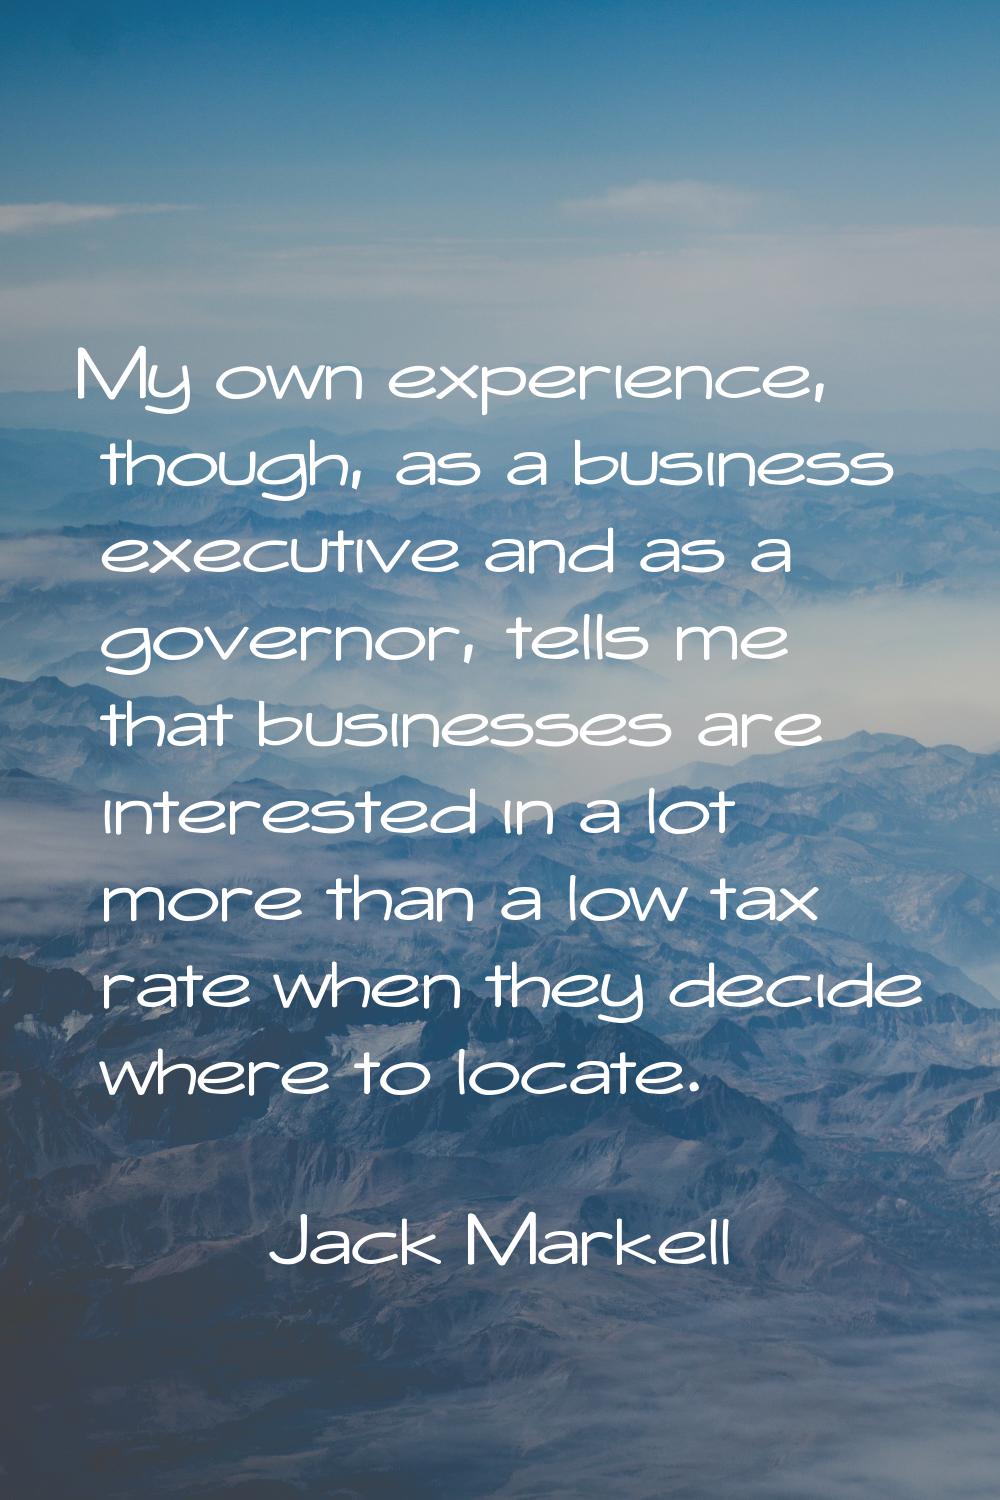 My own experience, though, as a business executive and as a governor, tells me that businesses are 